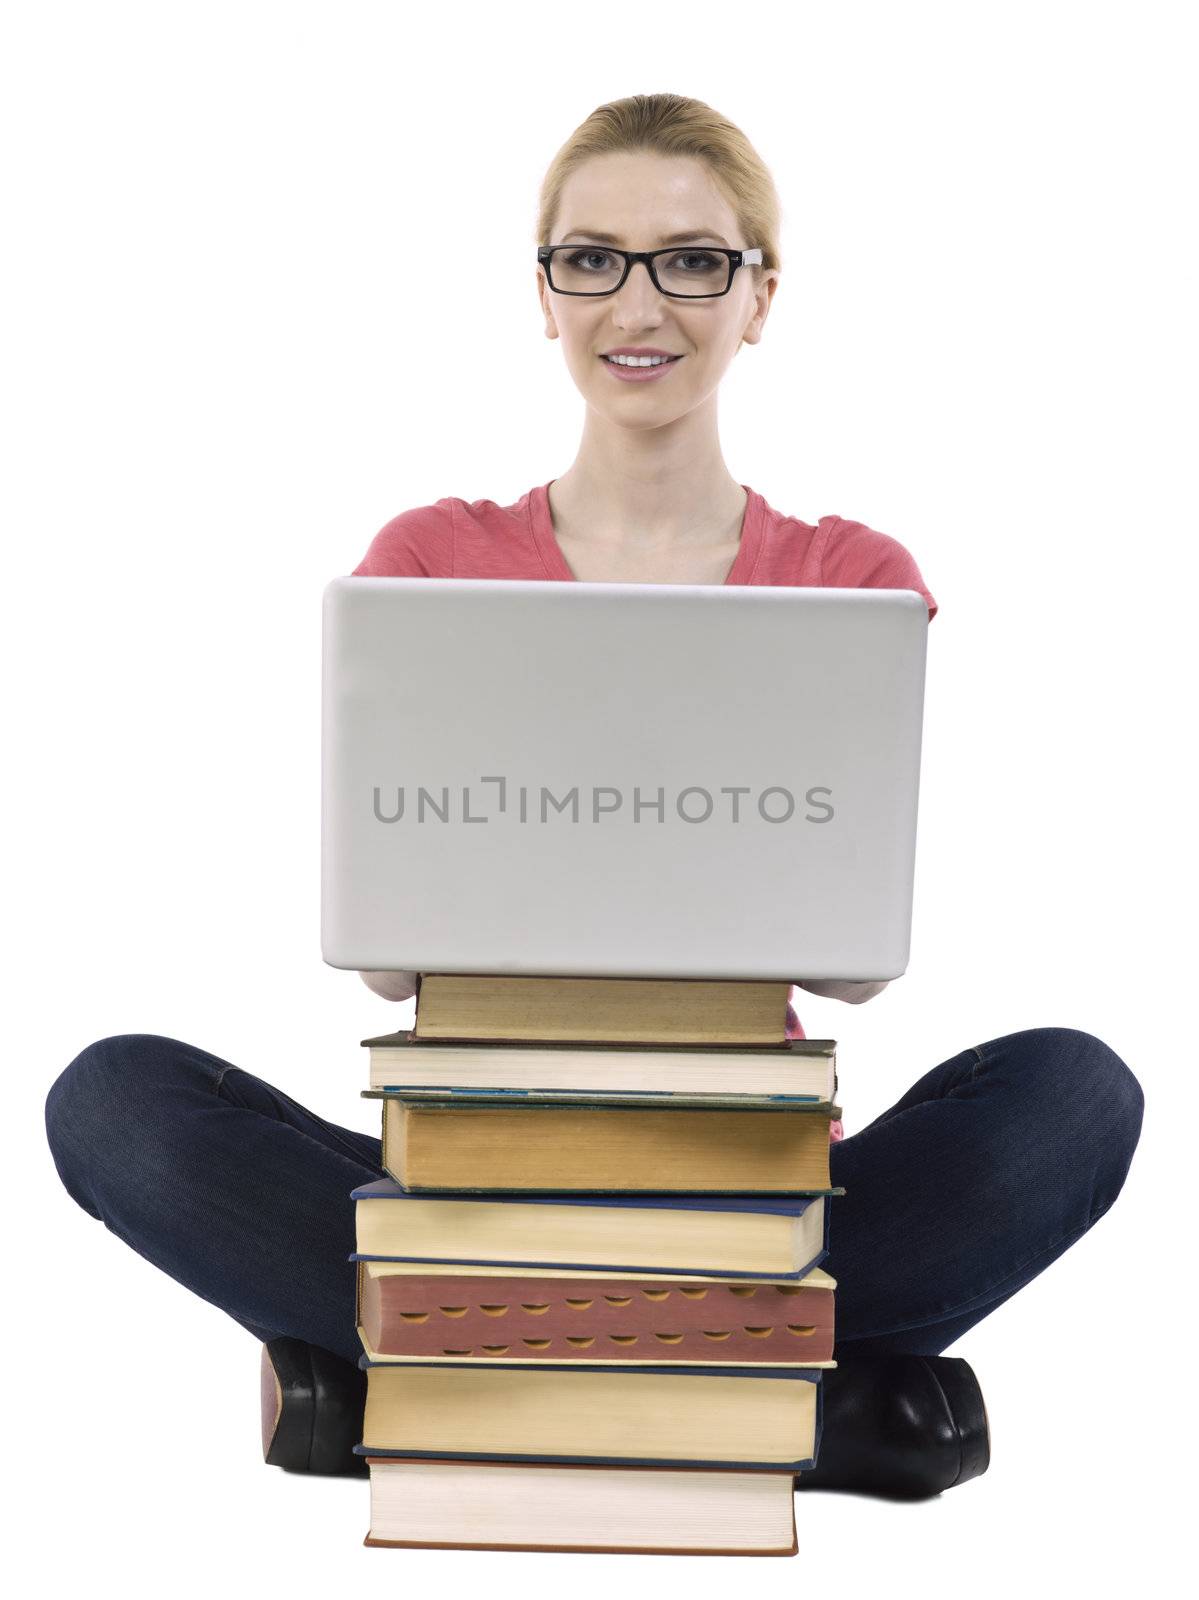 Image of female student using a laptop against white background